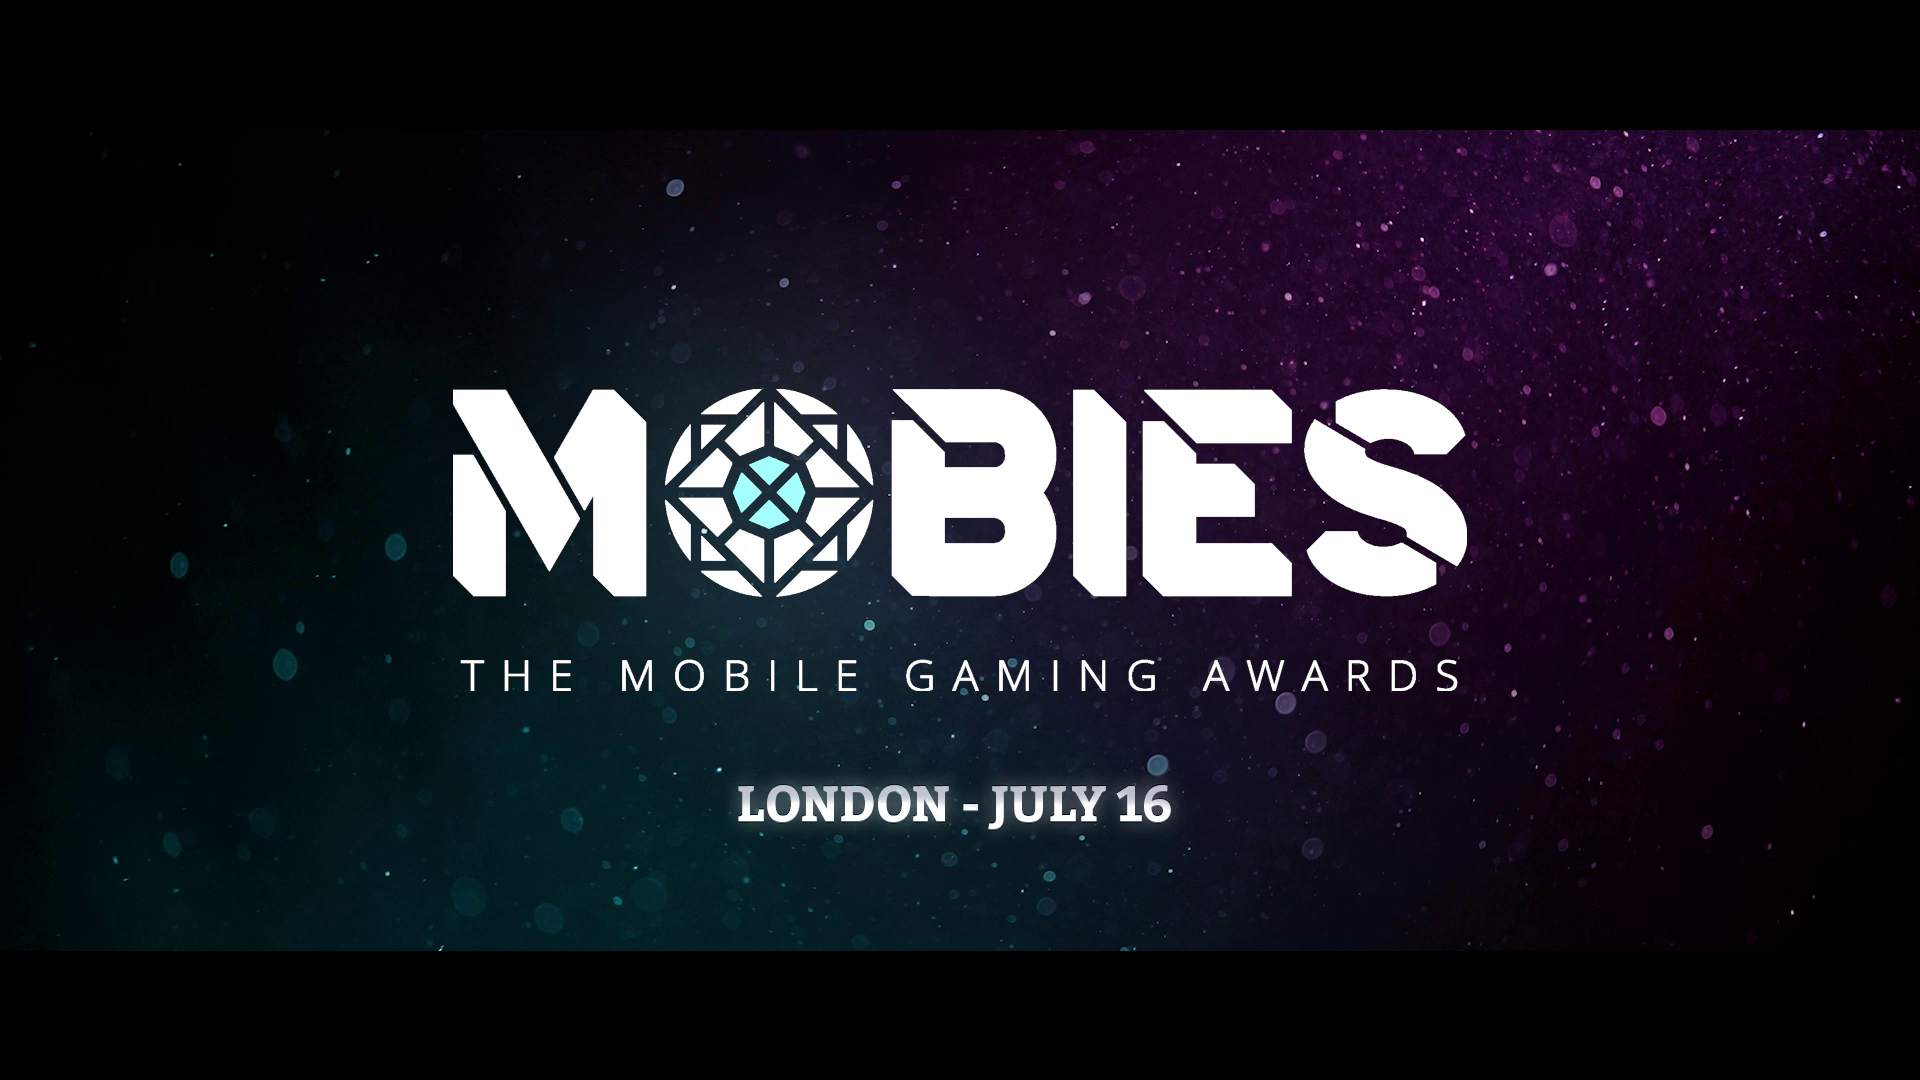 THE MOBIES NOMINATIONS OPEN TO THE PUBLIC FOR THE FIRST TIME